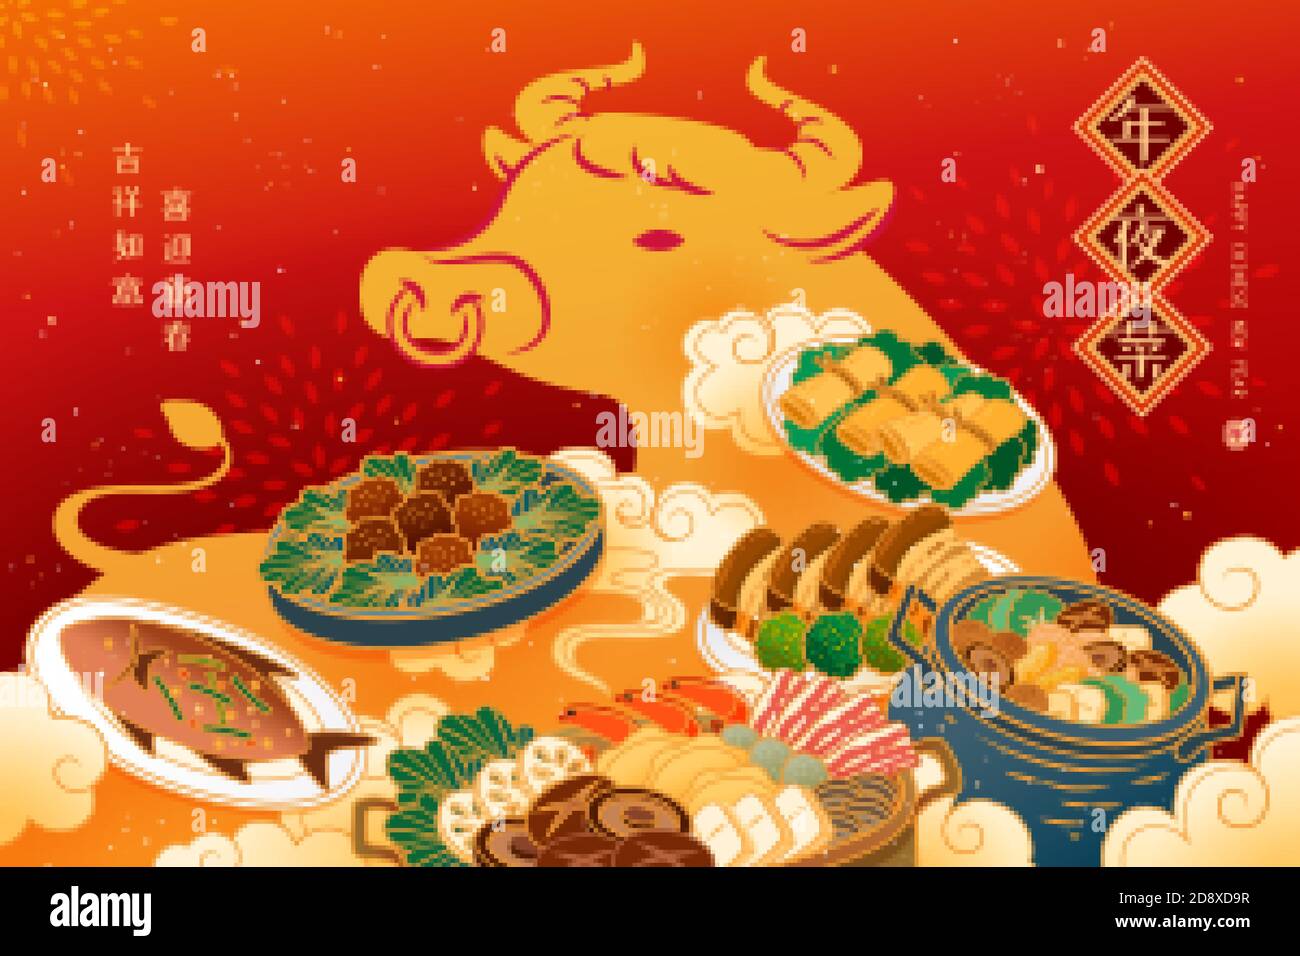 Food for Chinese New year reunion dinner, designed with cattle as the main background image, Chinese text translation: Reunion dinner food, welcoming Stock Vector